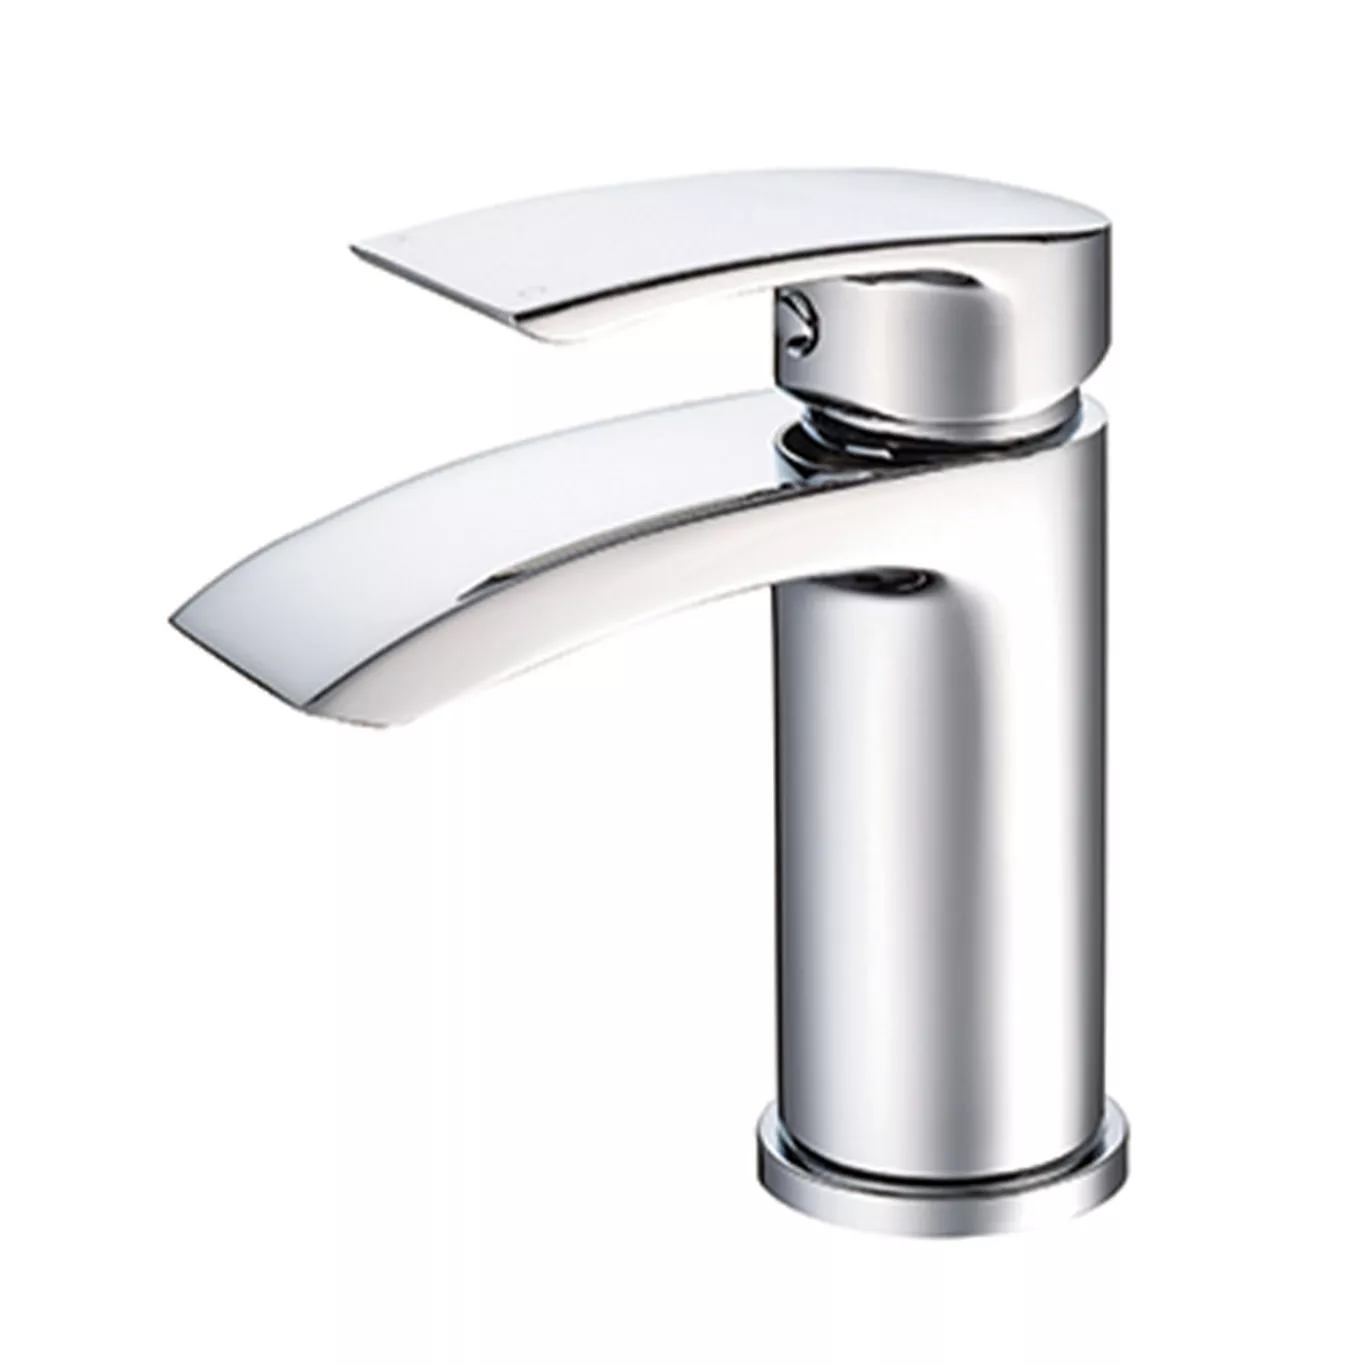 A sleek, silver tap from the NOW Collection